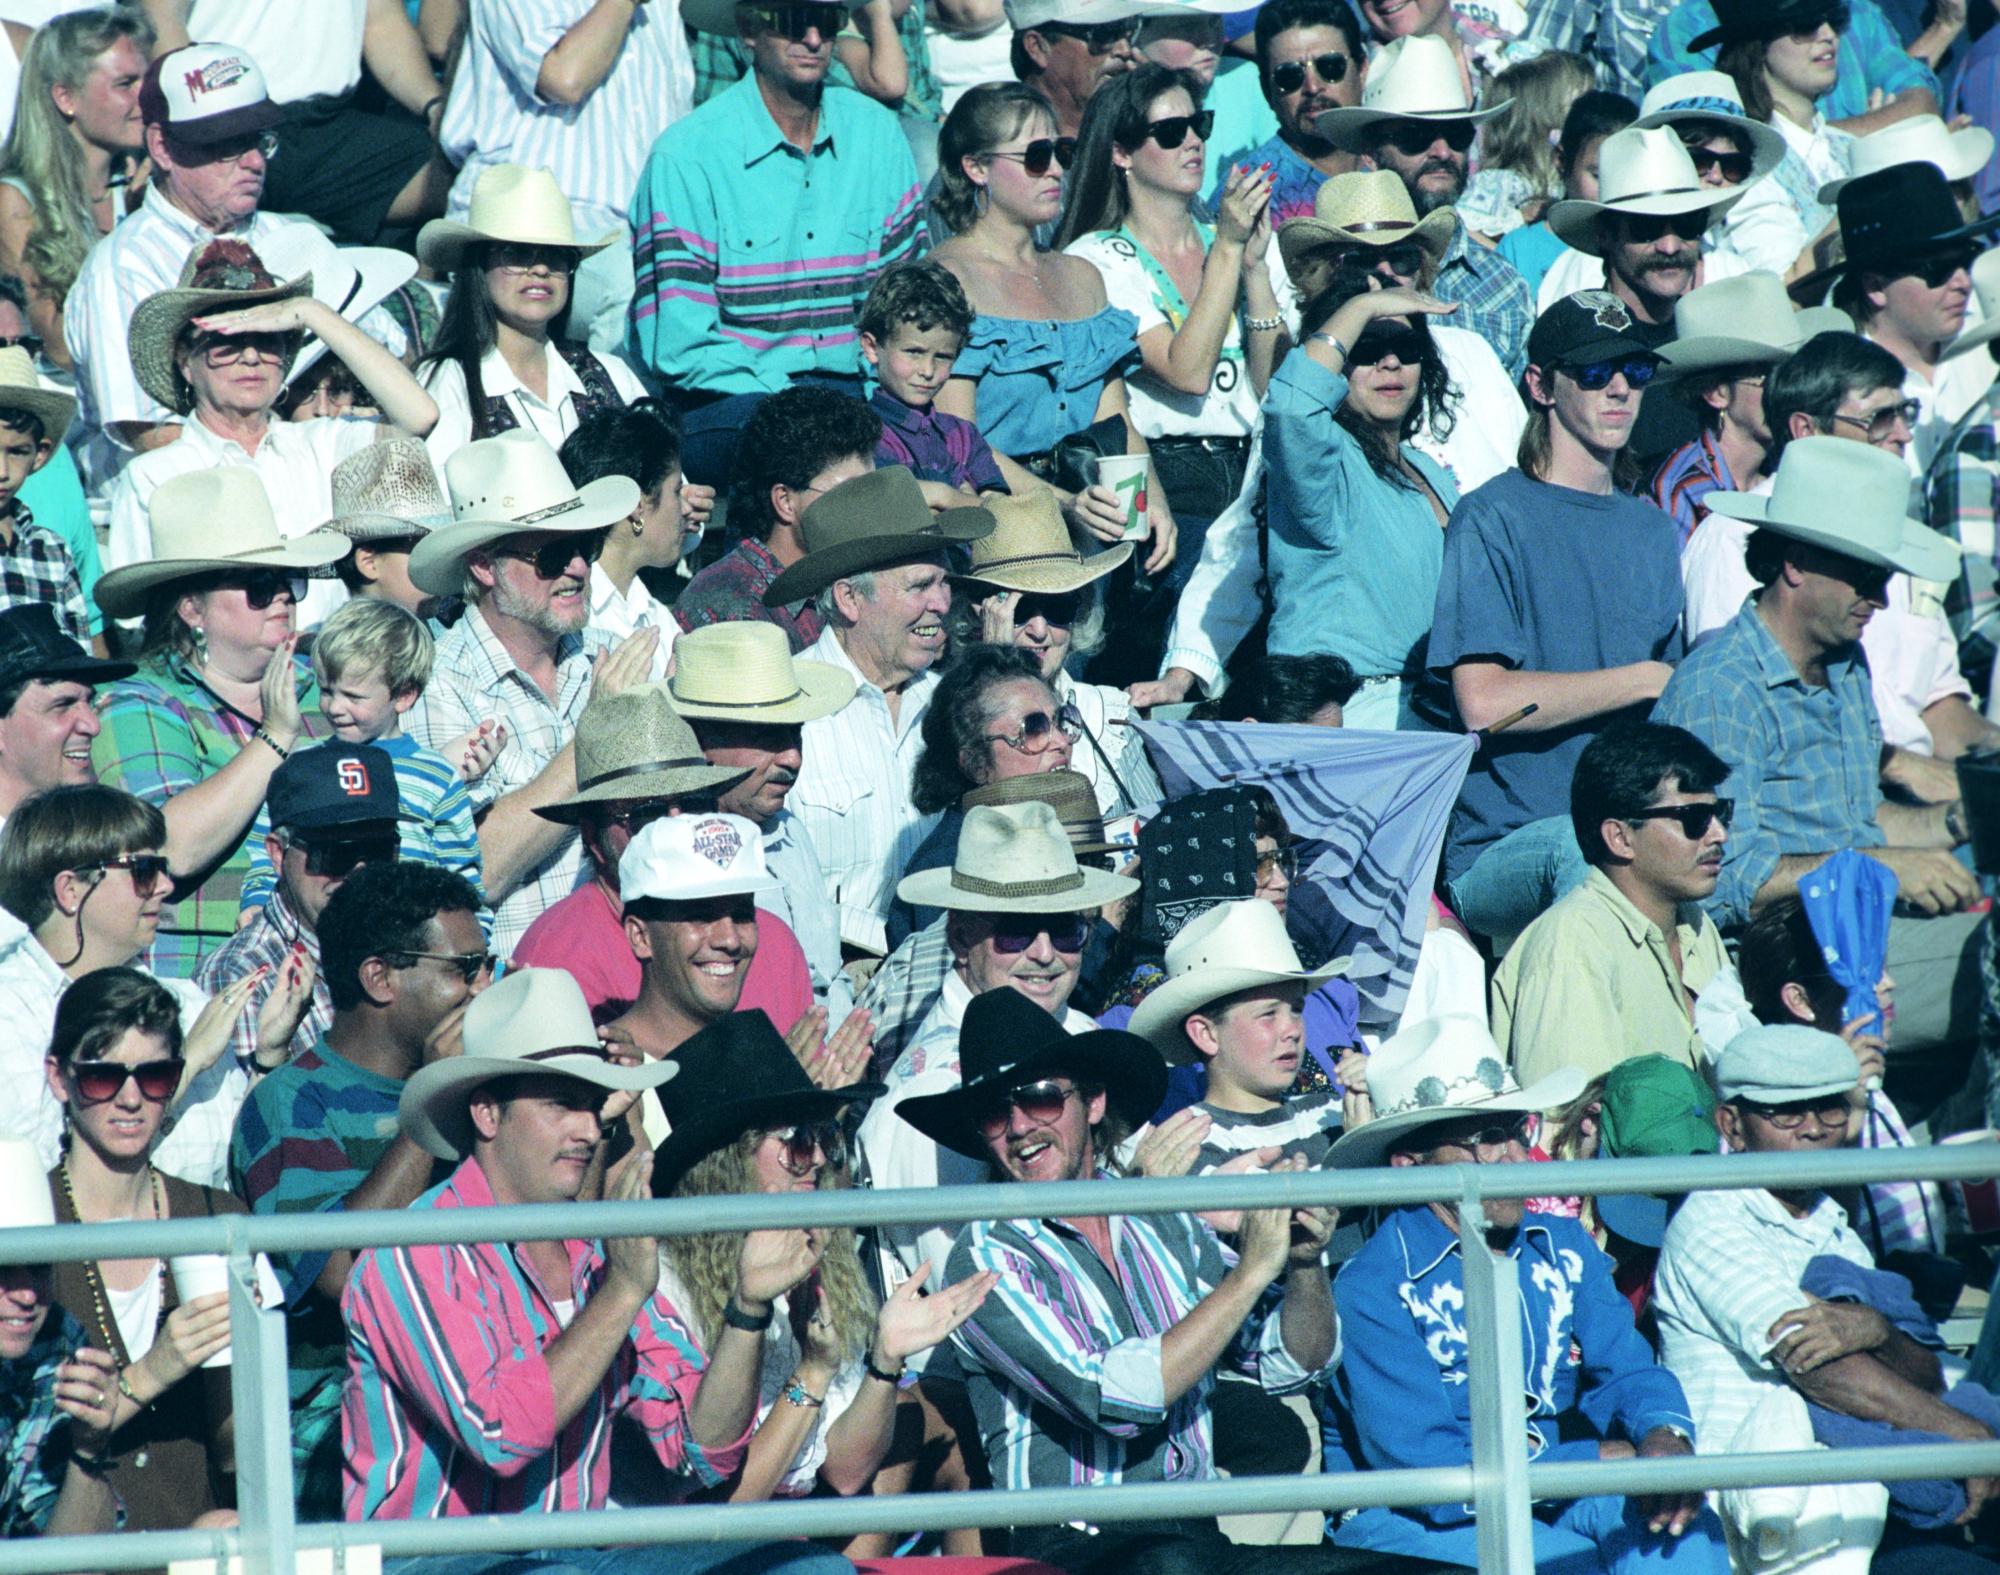 Imperial Valley Rodeo (1992) - In The Bleachers